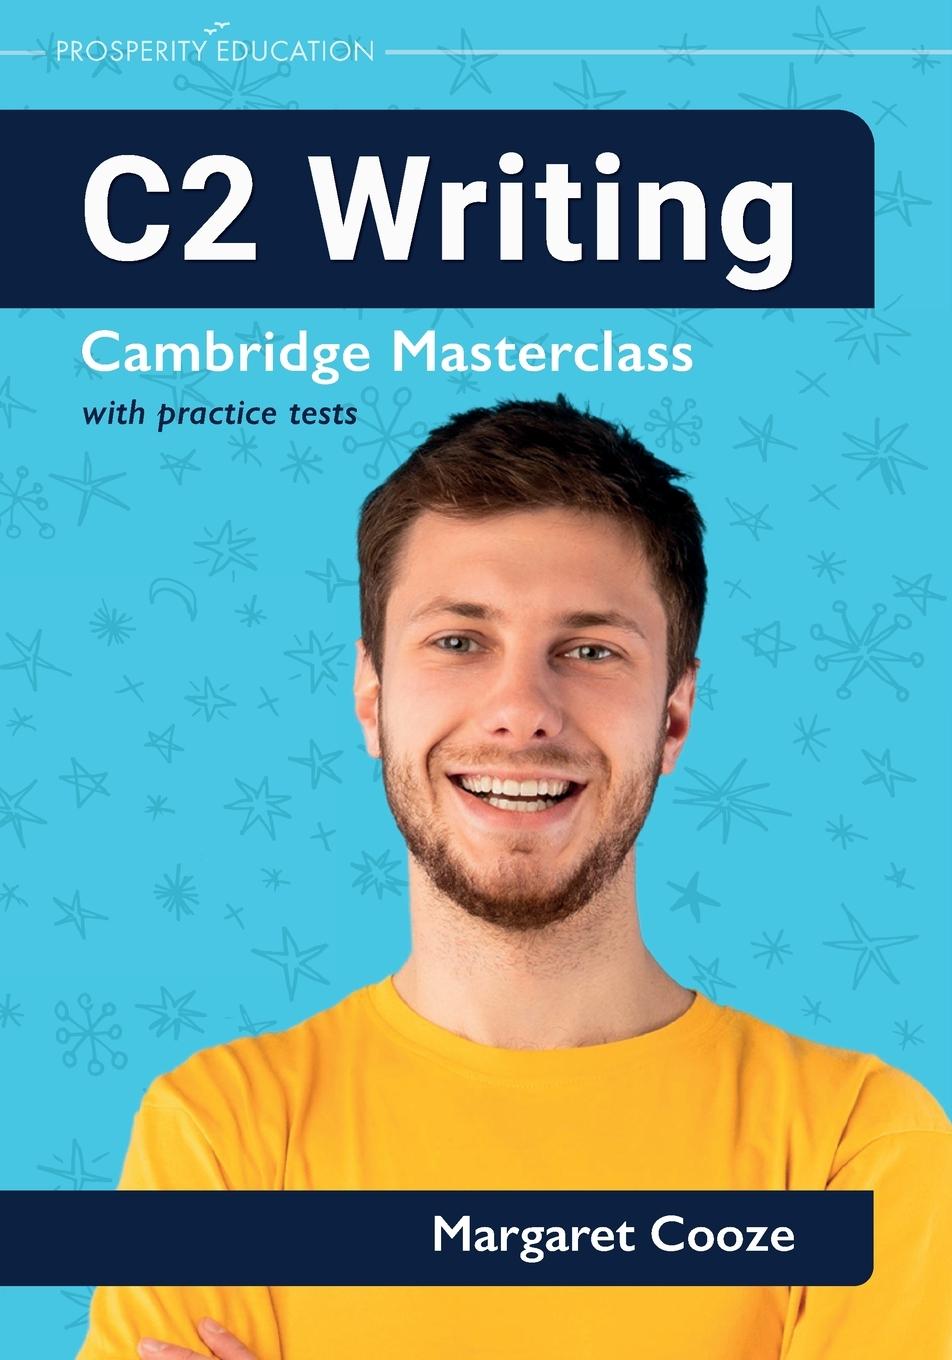 Book C2 Writing | Cambridge Masterclass with practice tests 